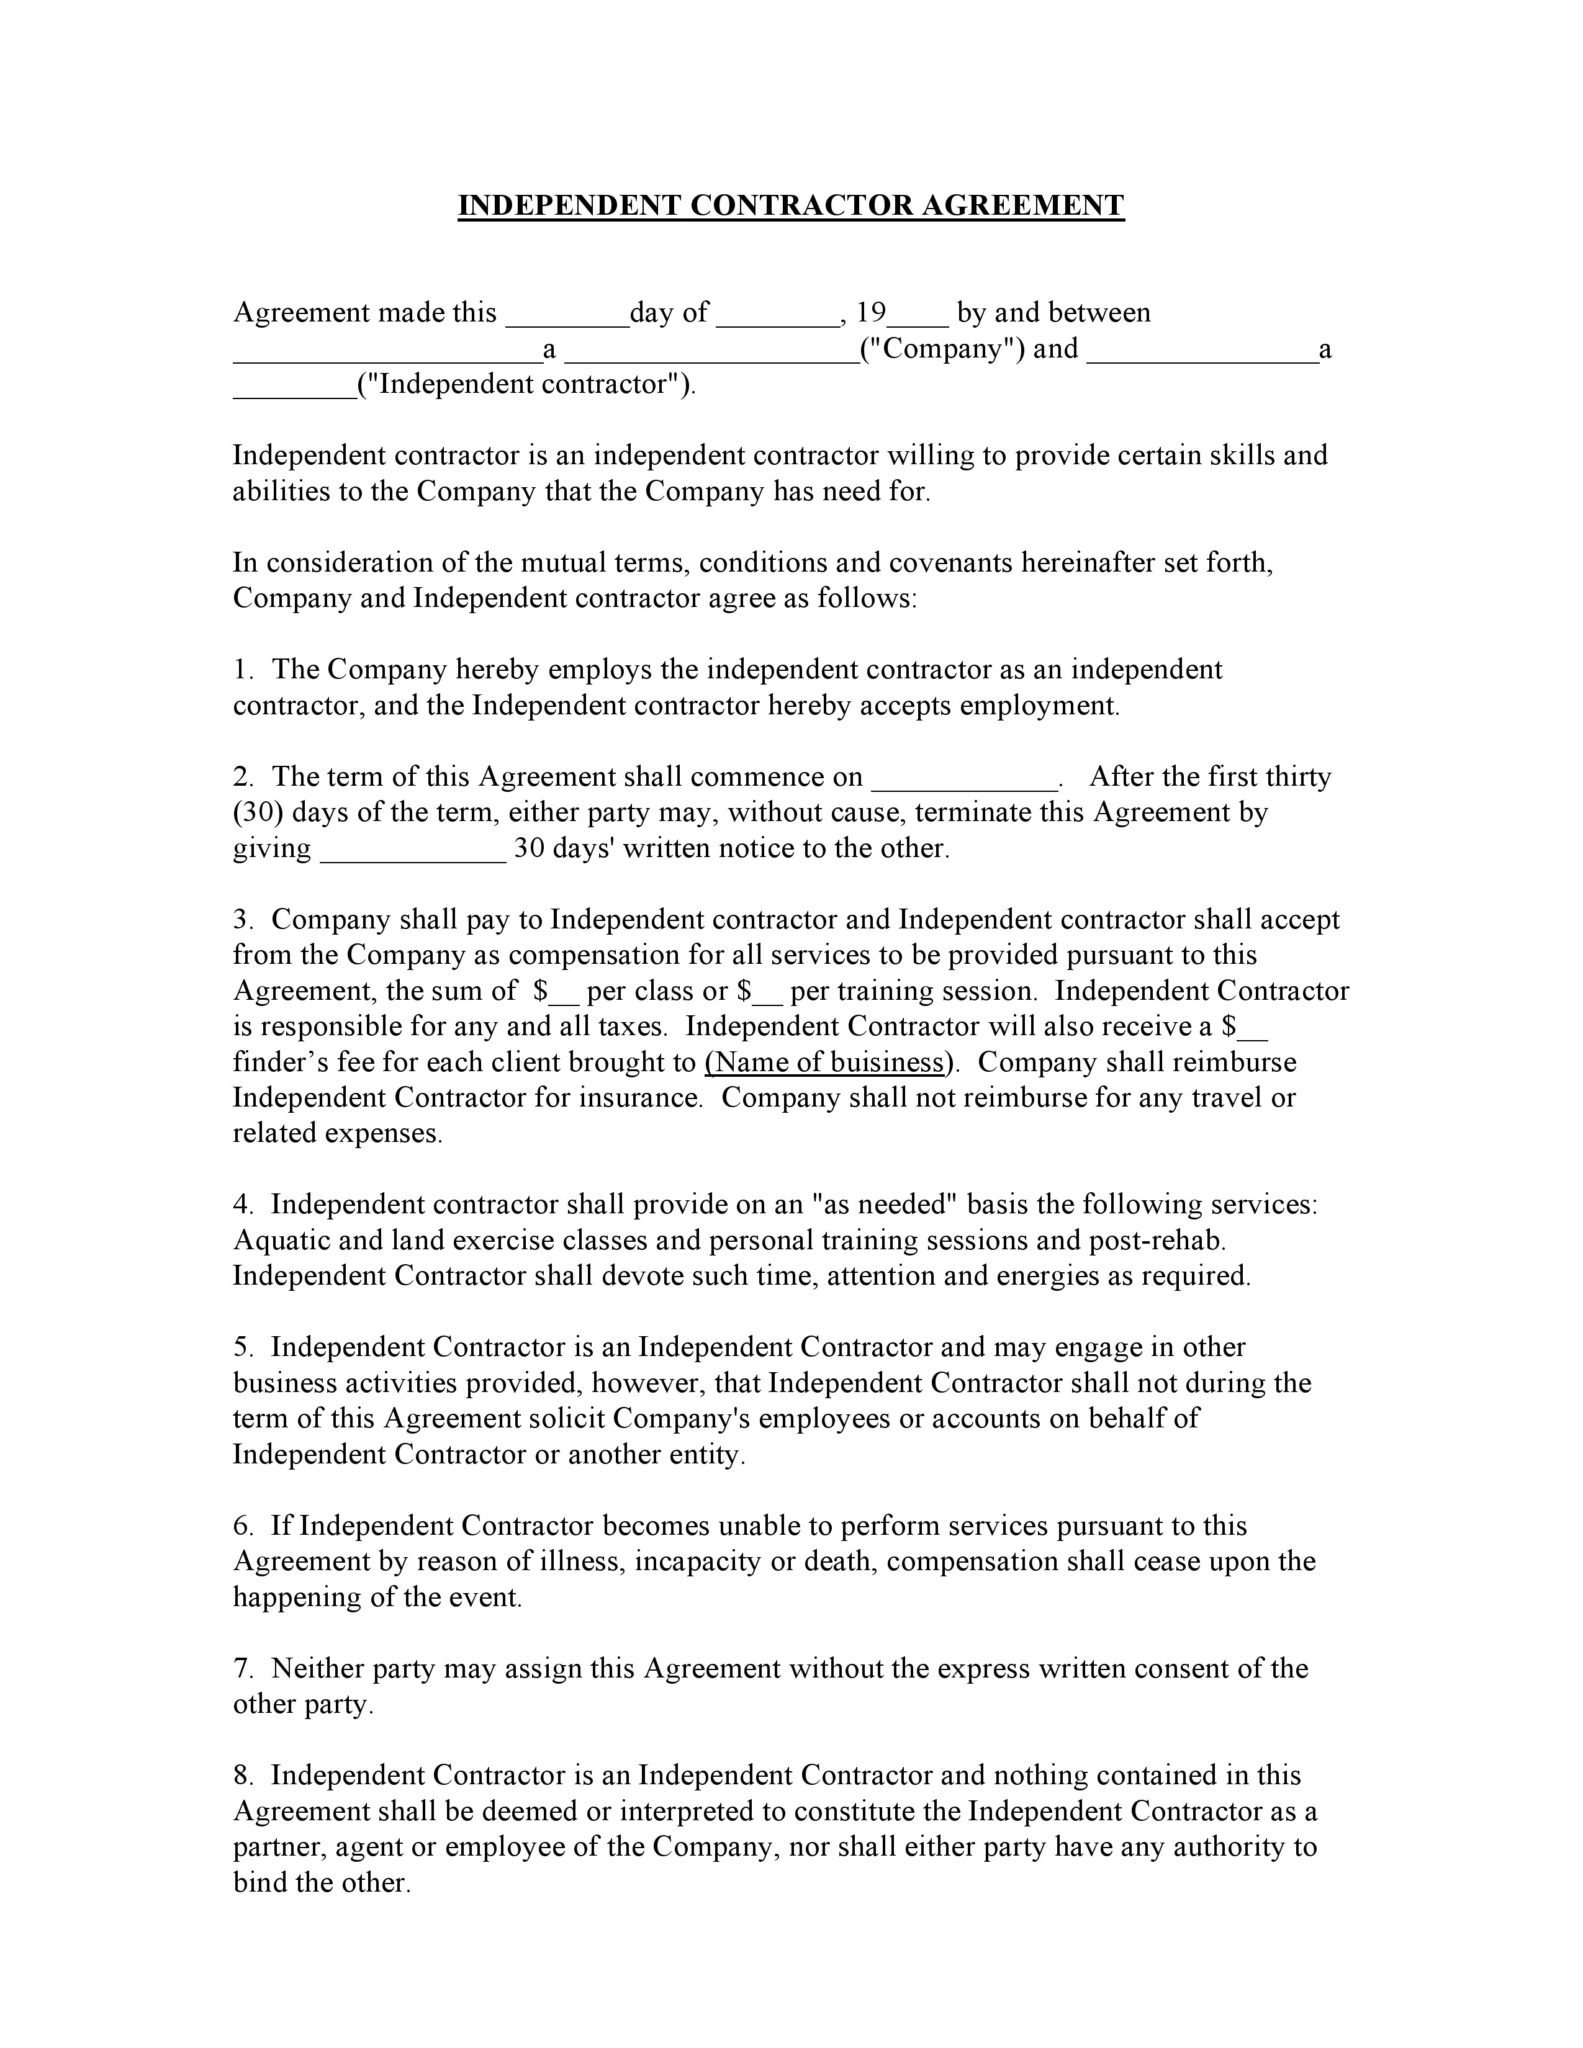 Free Printable Independent Contractor Agreement - Printable Agreements - Free Printable Independent Contractor Agreement